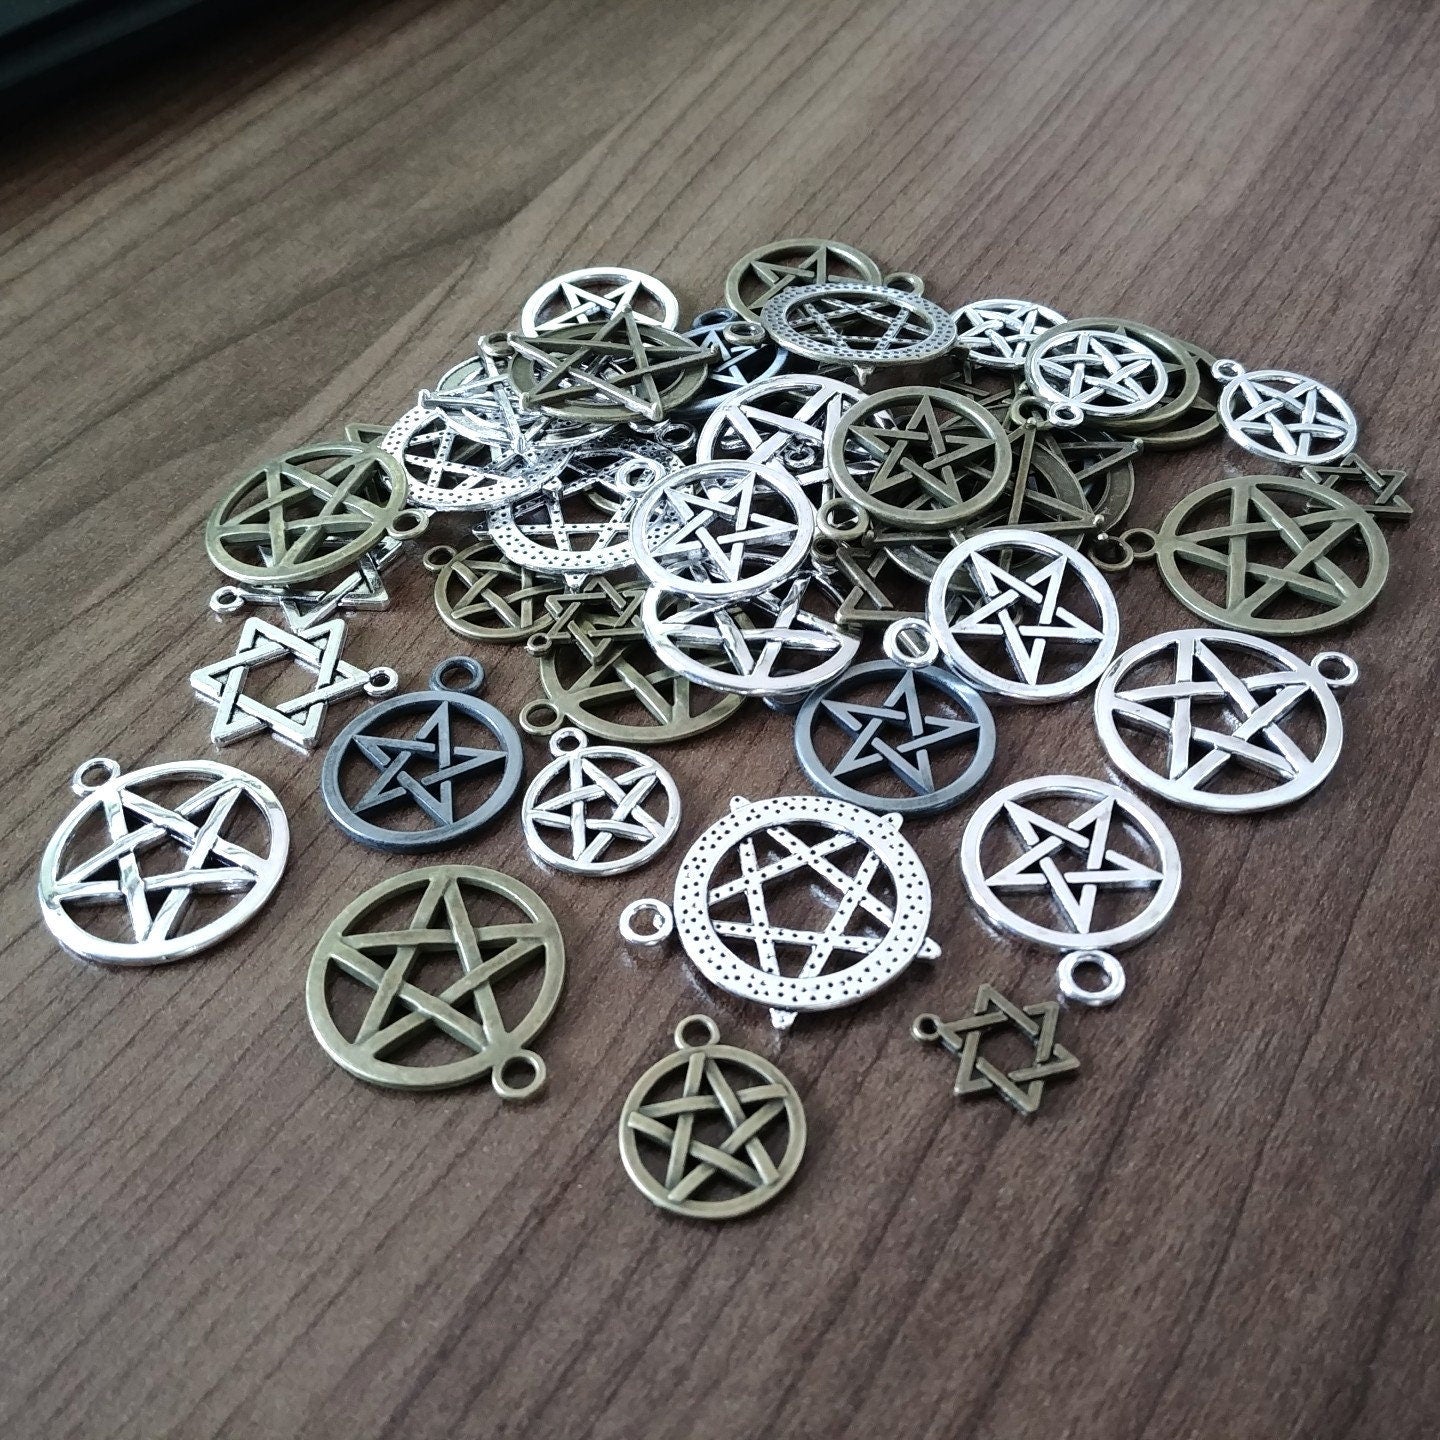 Assorted pentagram bulk charms, Nickel free metal mixed pendants,  Charm mix grab bag for jewelry making